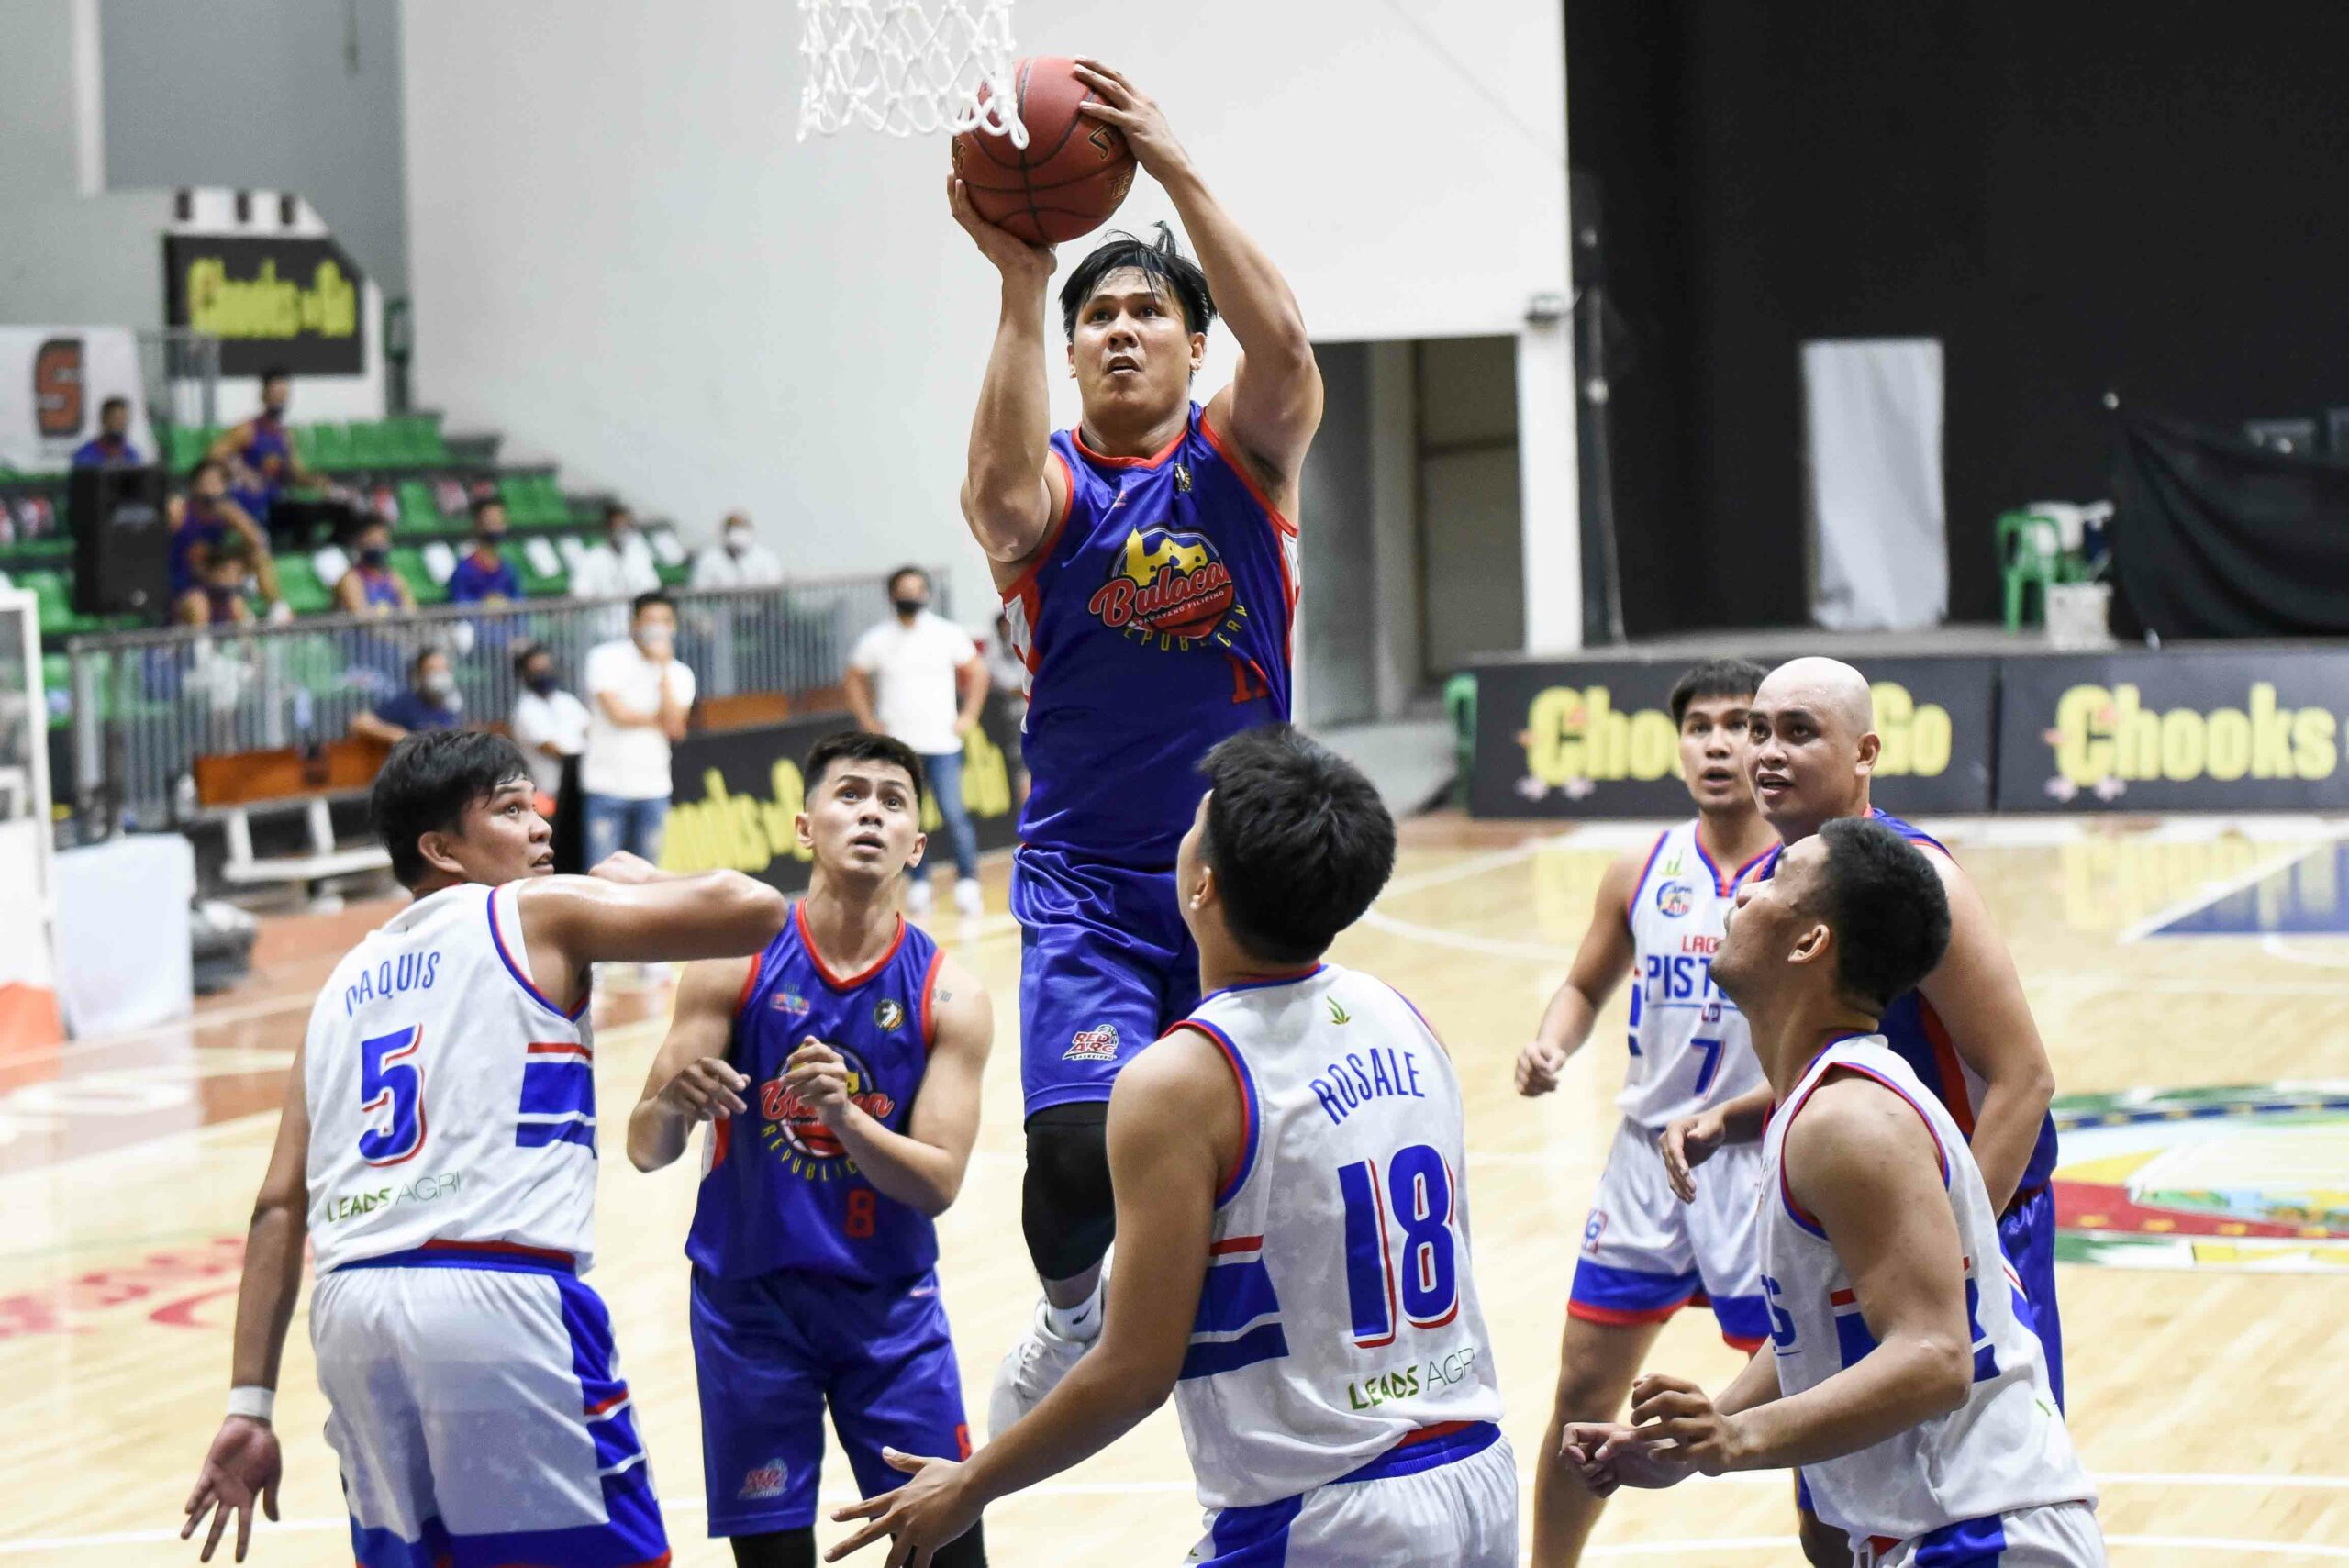 2021-Chooks-NBL-Laguna-vs-Bulacan-DF-Earnest-Efren-Reyes-Bulacan-scaled NBL: Operio, Moralejo boot out Laguna in OT as Bulacan DF keeps twice-to-beat hopes up Basketball NBL News  - philippine sports news